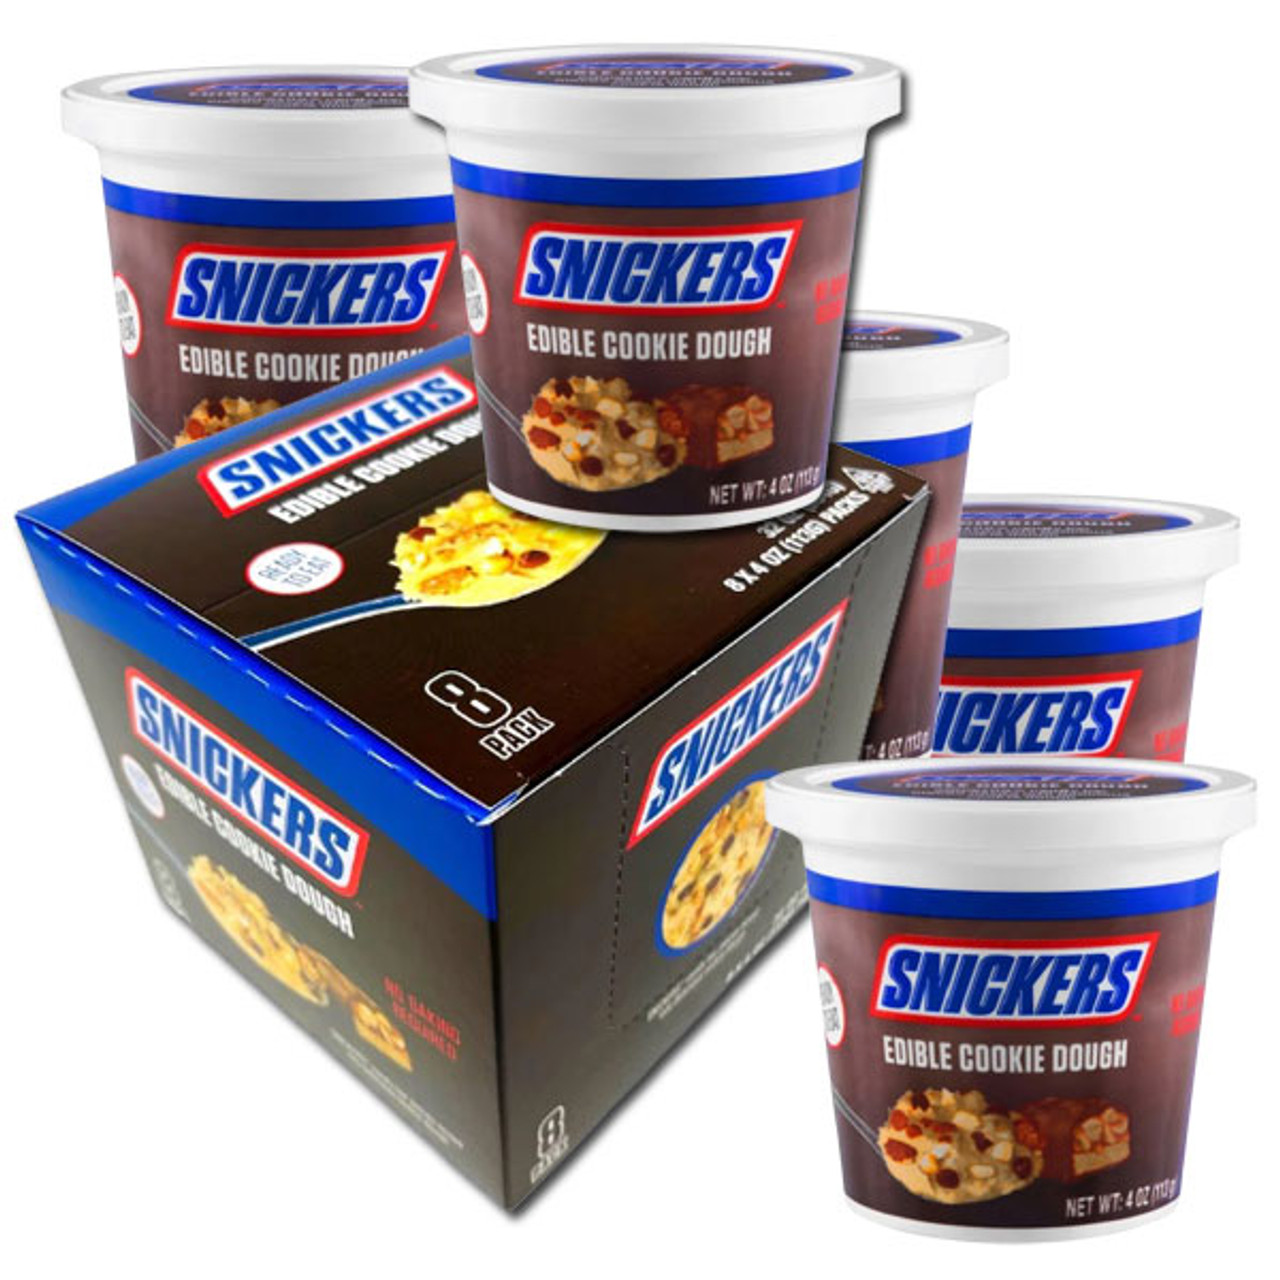 Snickers Cookie Dough - 8.5oz